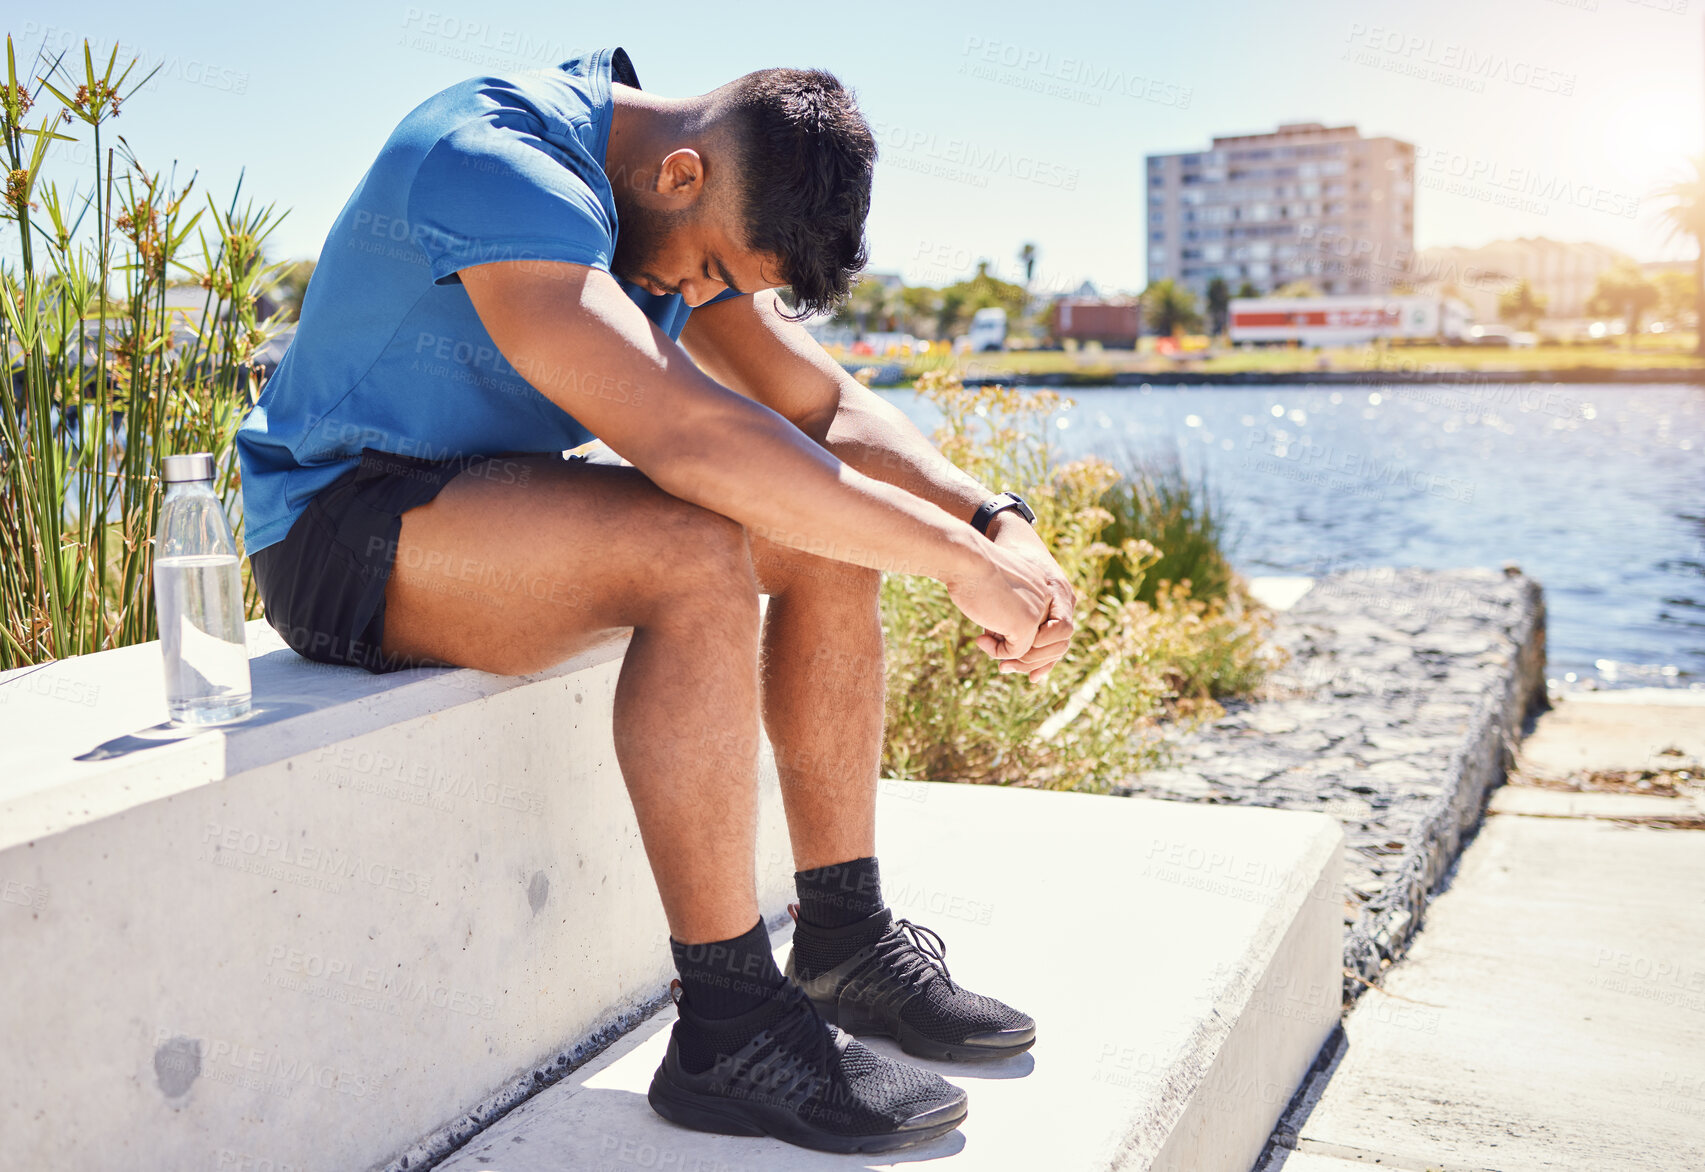 Buy stock photo One young mixed race man sitting and taking a break from exercising outside. Exercise helps with depression and anxiety. Hispanic man looking exhausted and low on energy while training outdoors